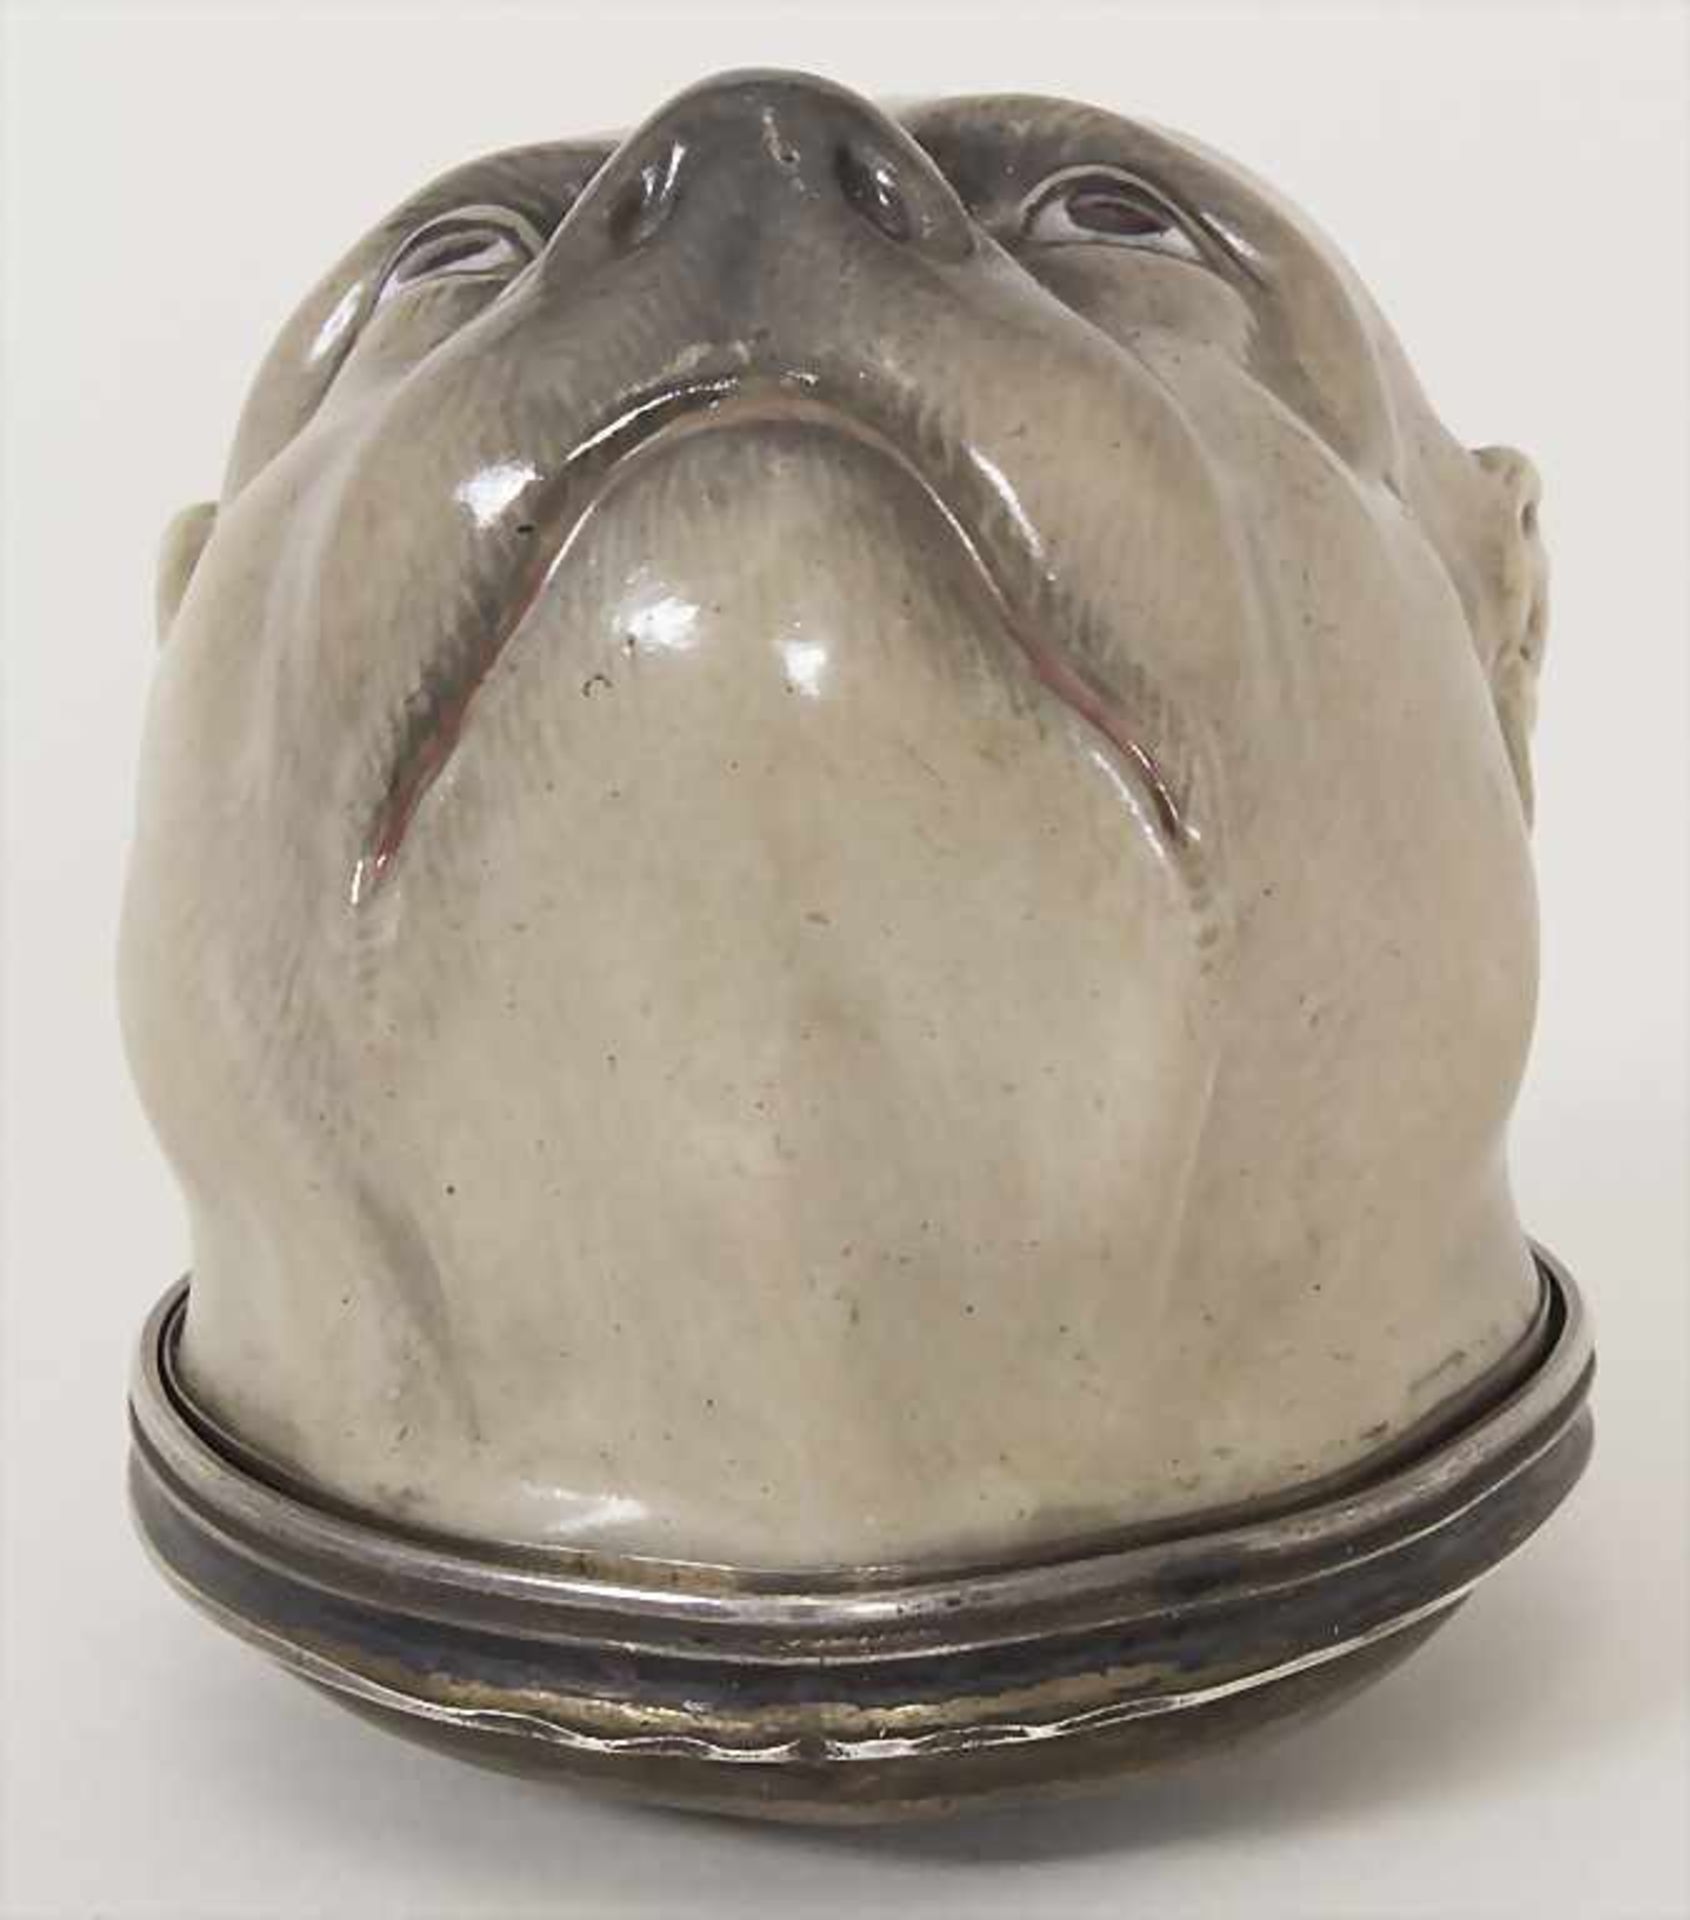 Tabatiere 'Mopskopf' / A snuff-box in the form of a pug's head, Meissen, um 1750Material: Porzellan, - Image 9 of 11